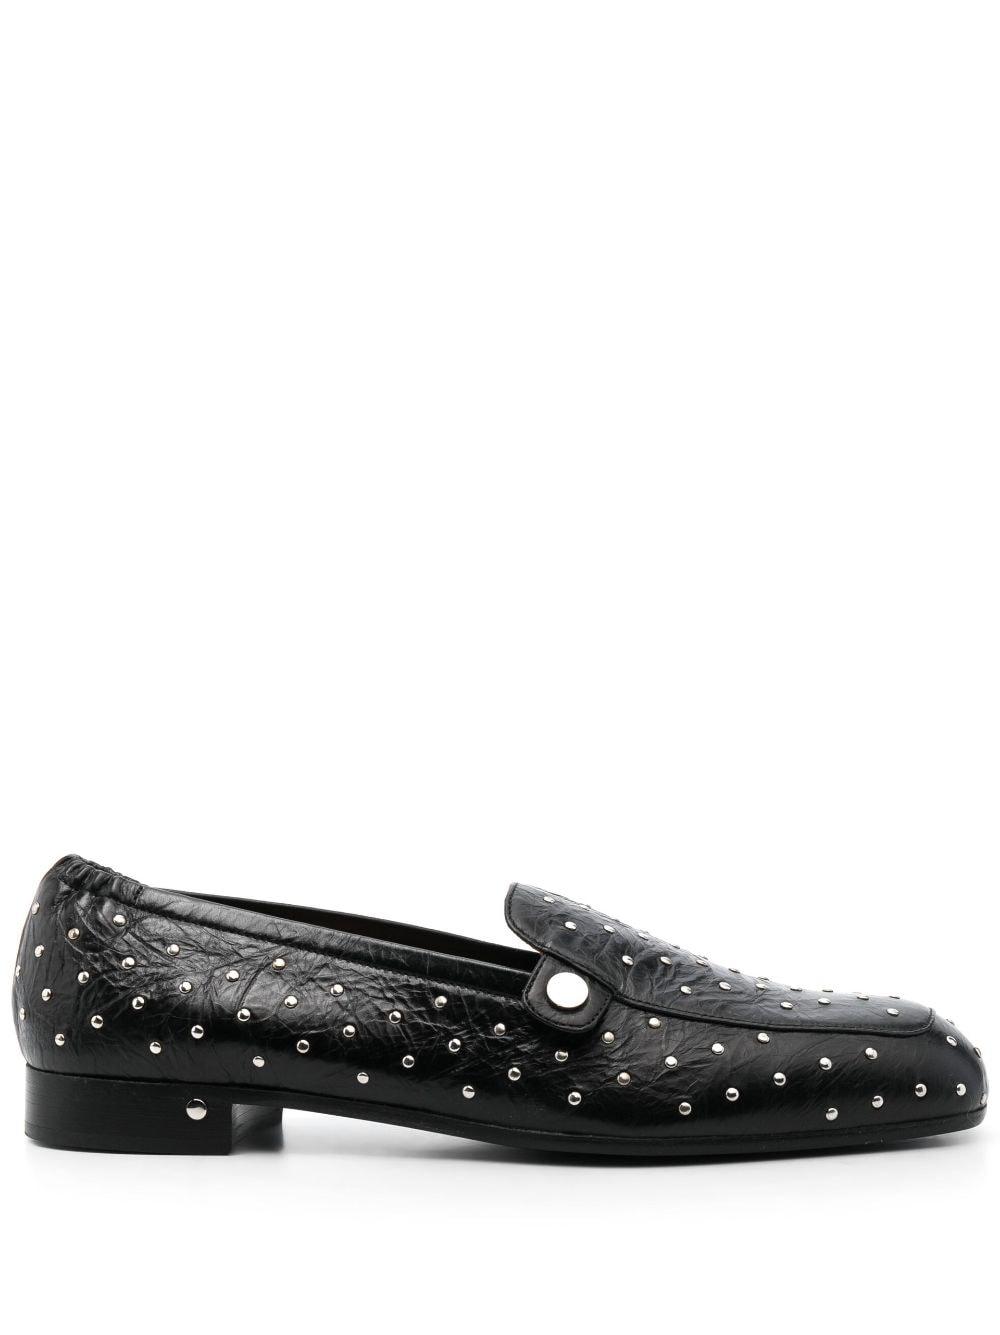 Laurence Dacade Stud-embellished Creased Leather Loafers in Black | Lyst